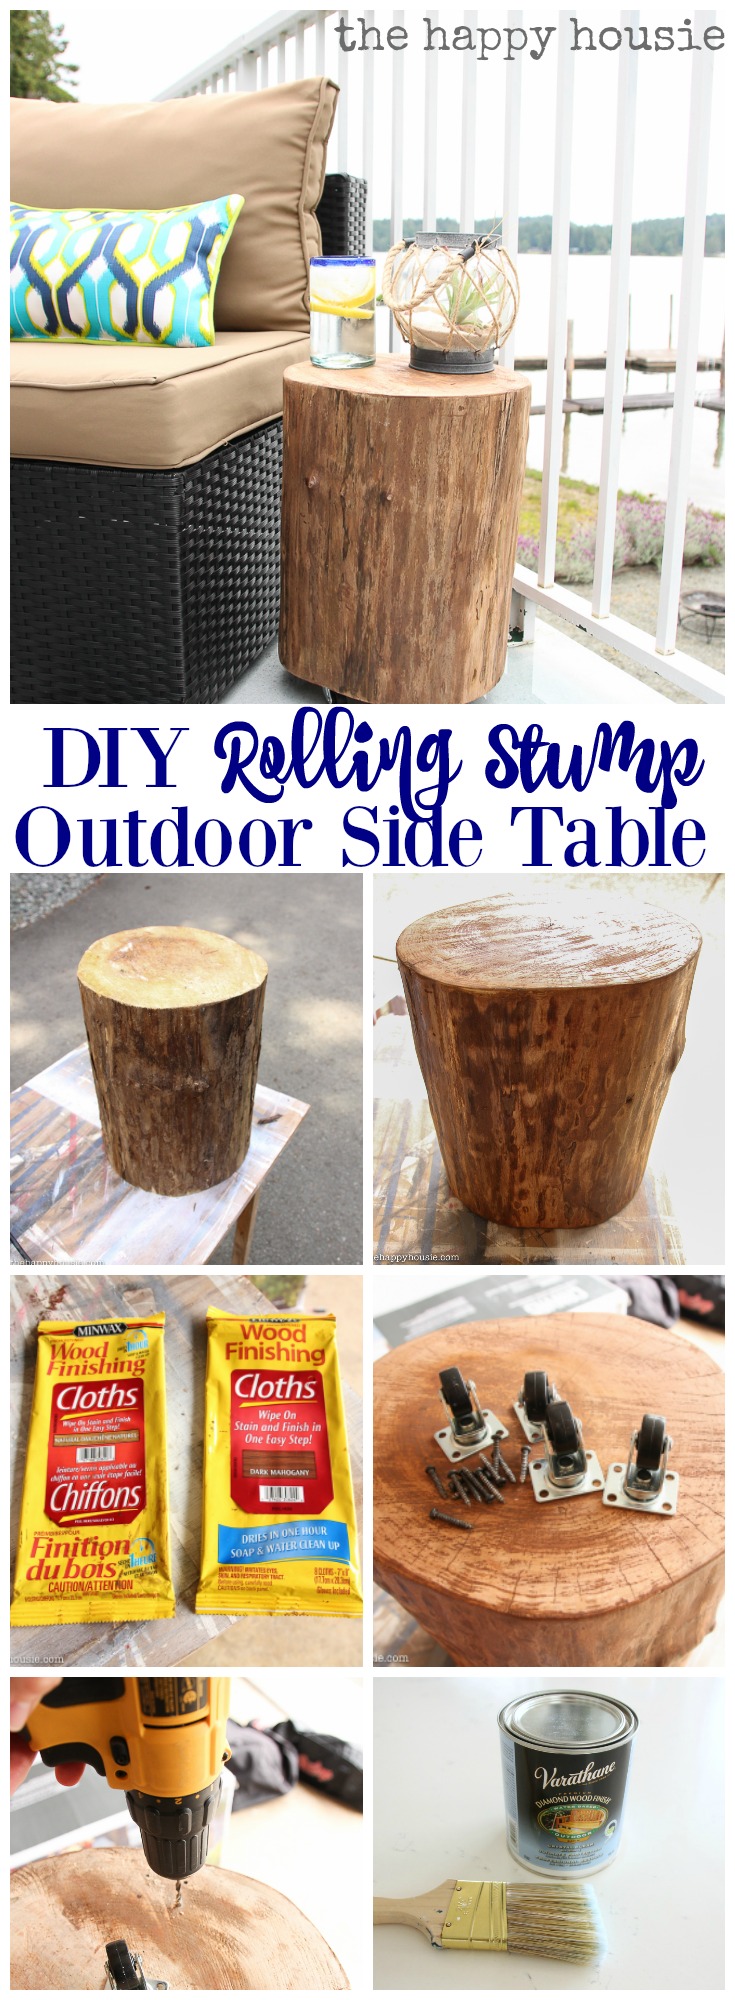 DIY Rolling Stump Outdoor Side Table poster.